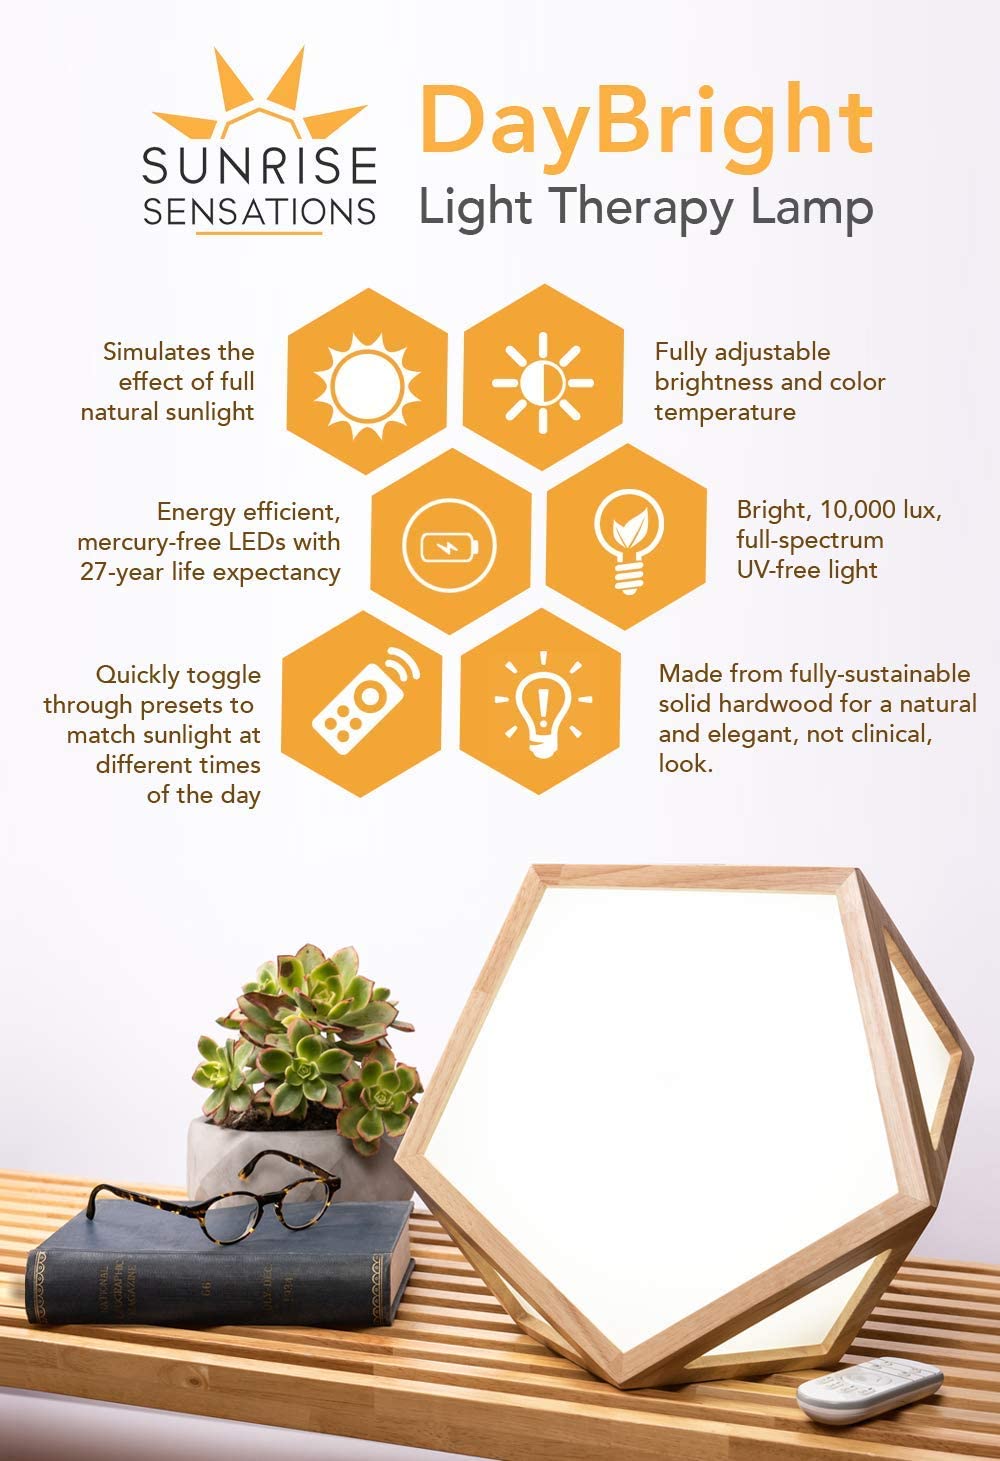 DayBright-Light-Therapy-Lamp-Functions